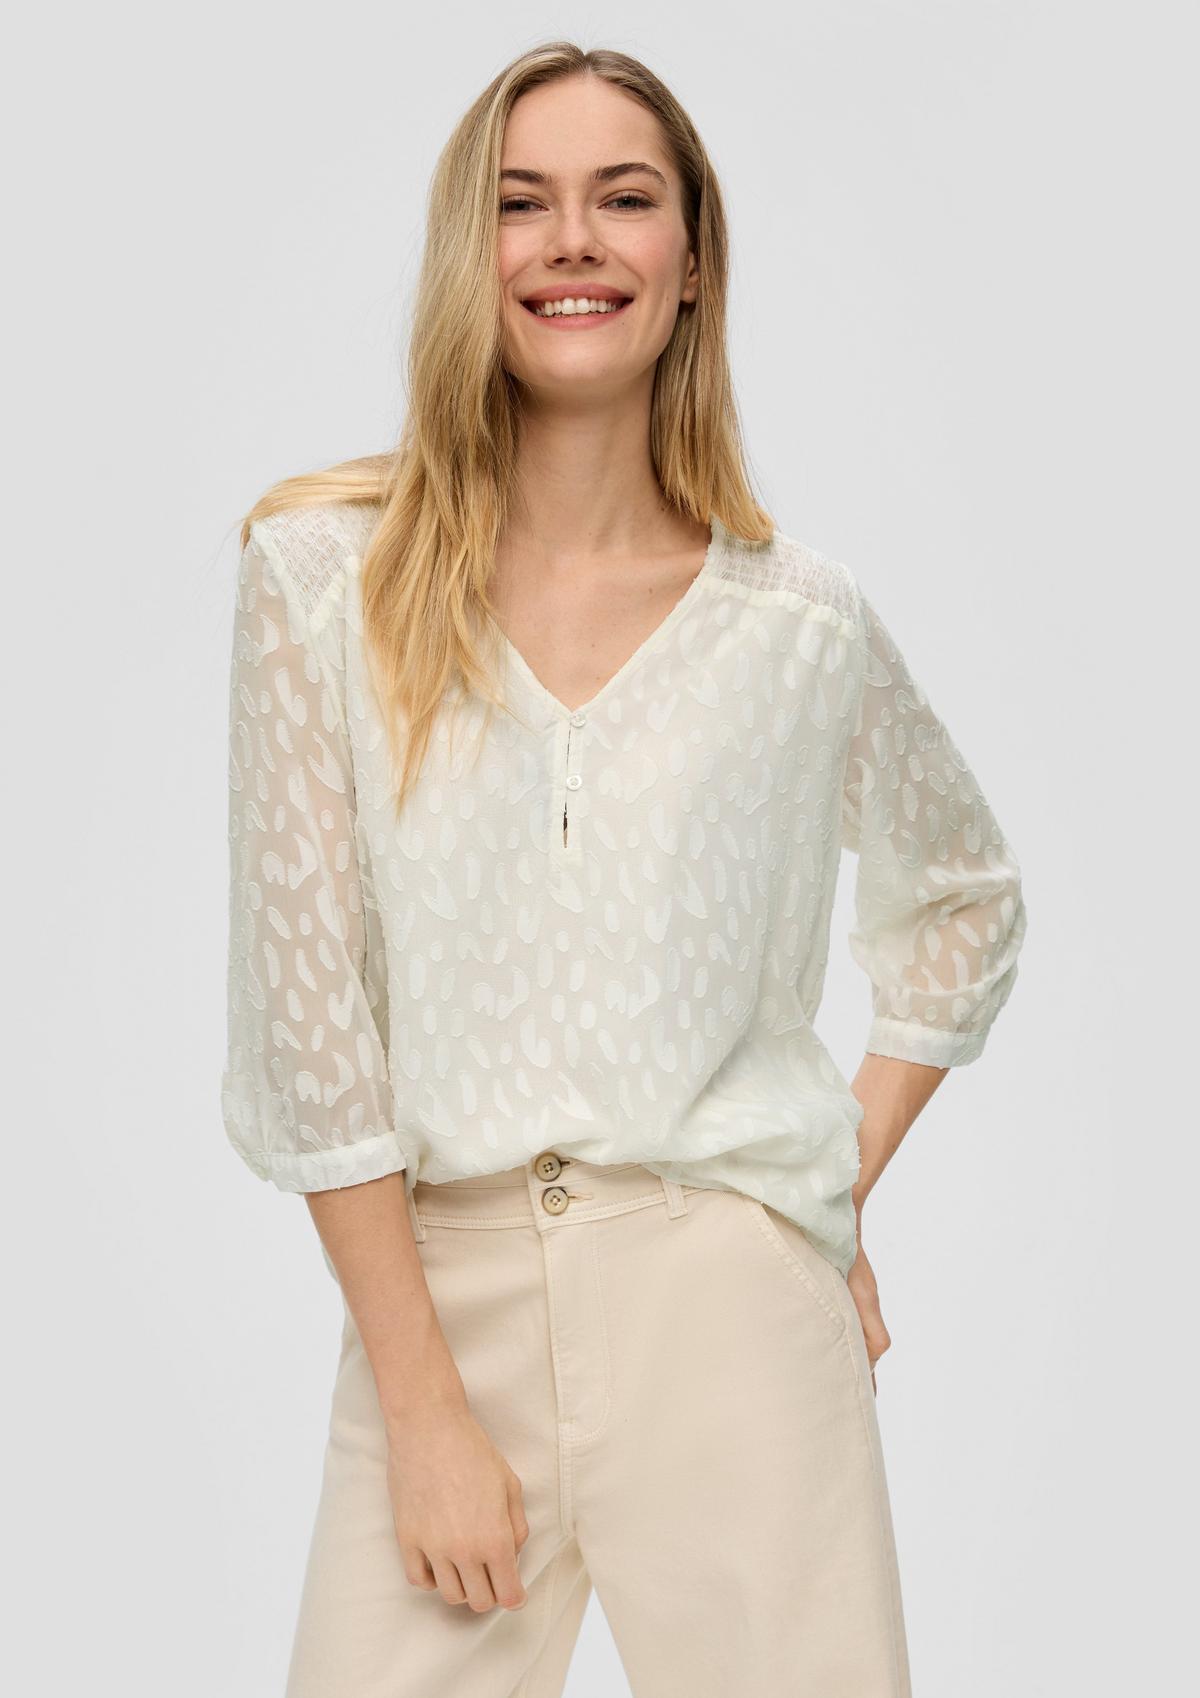 Chiffon blouse with smocked details